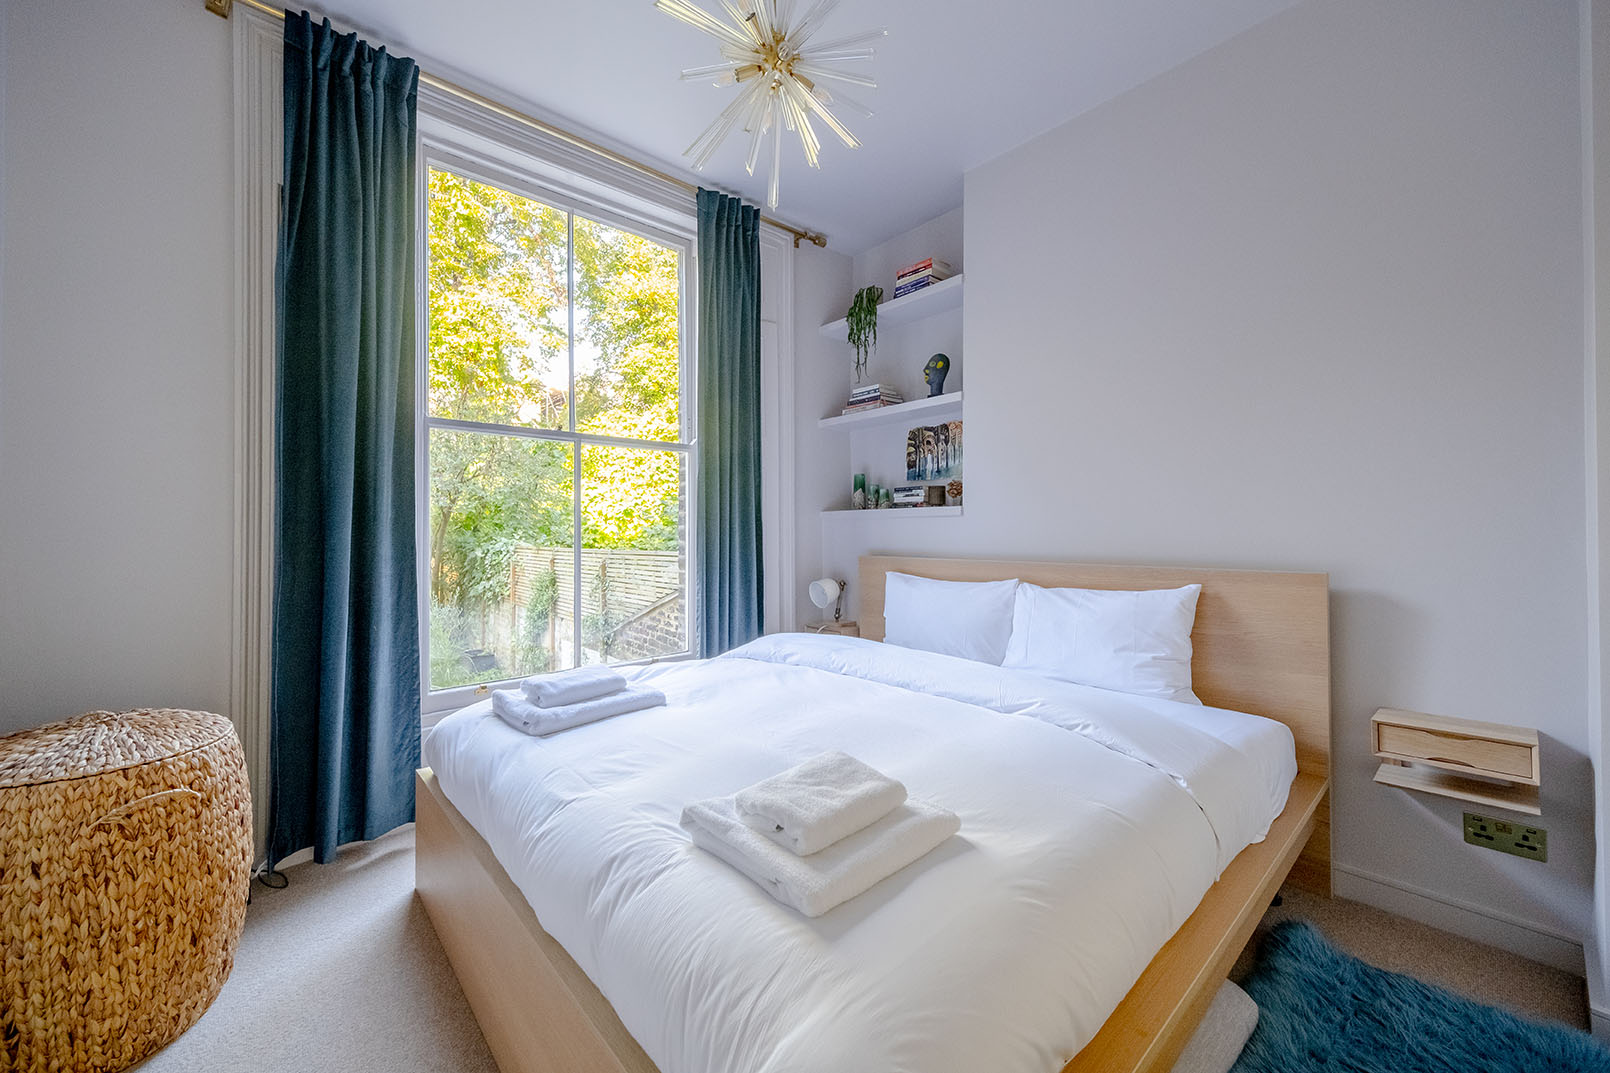 Cross angle image of a bedroom captured by a professional property photographer, white walls, white linens and a large window.